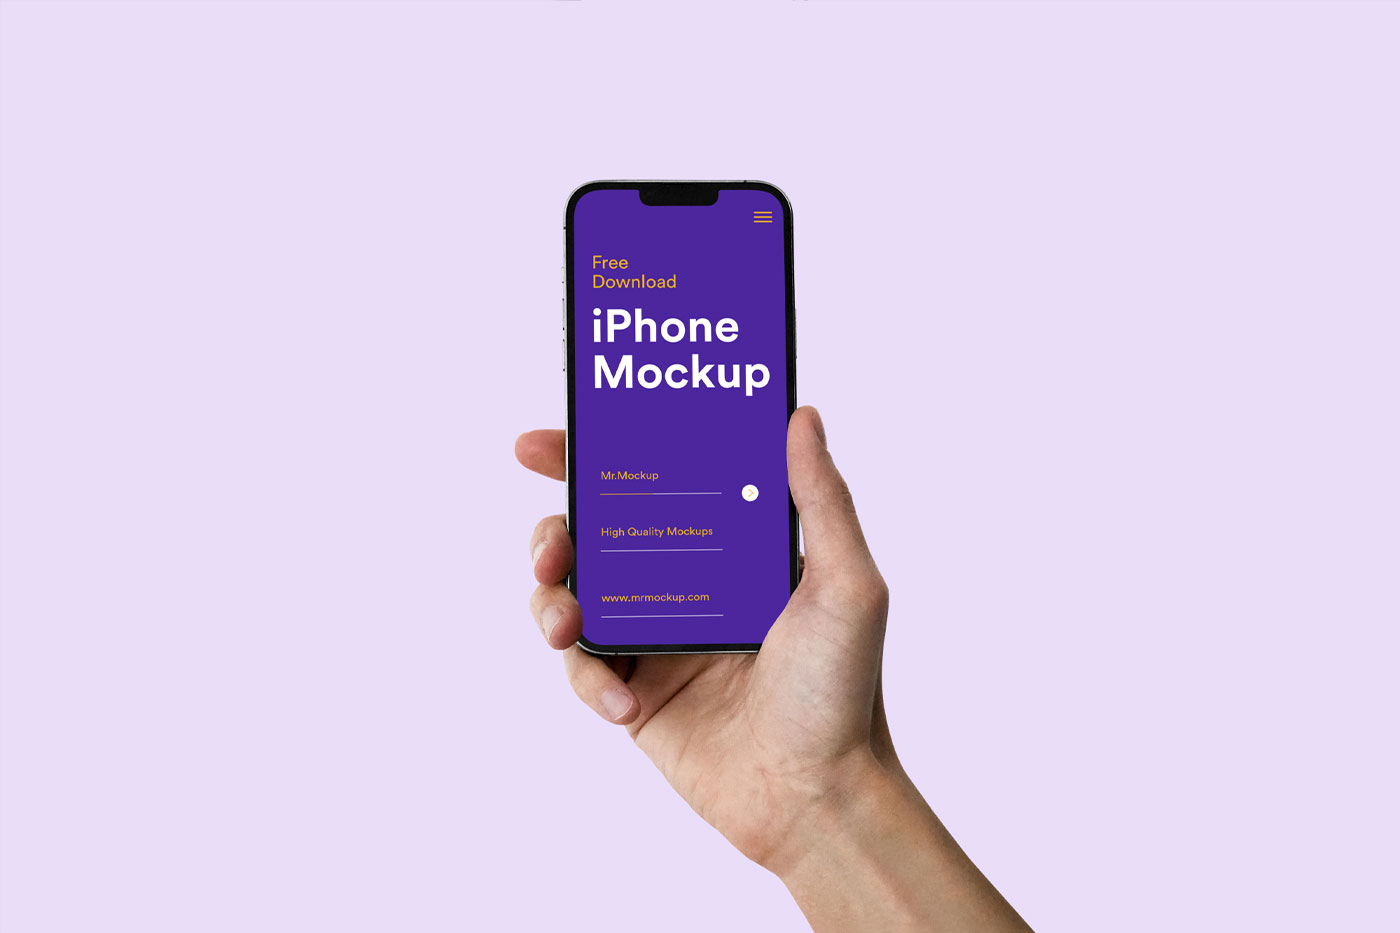 iphone in hand psd